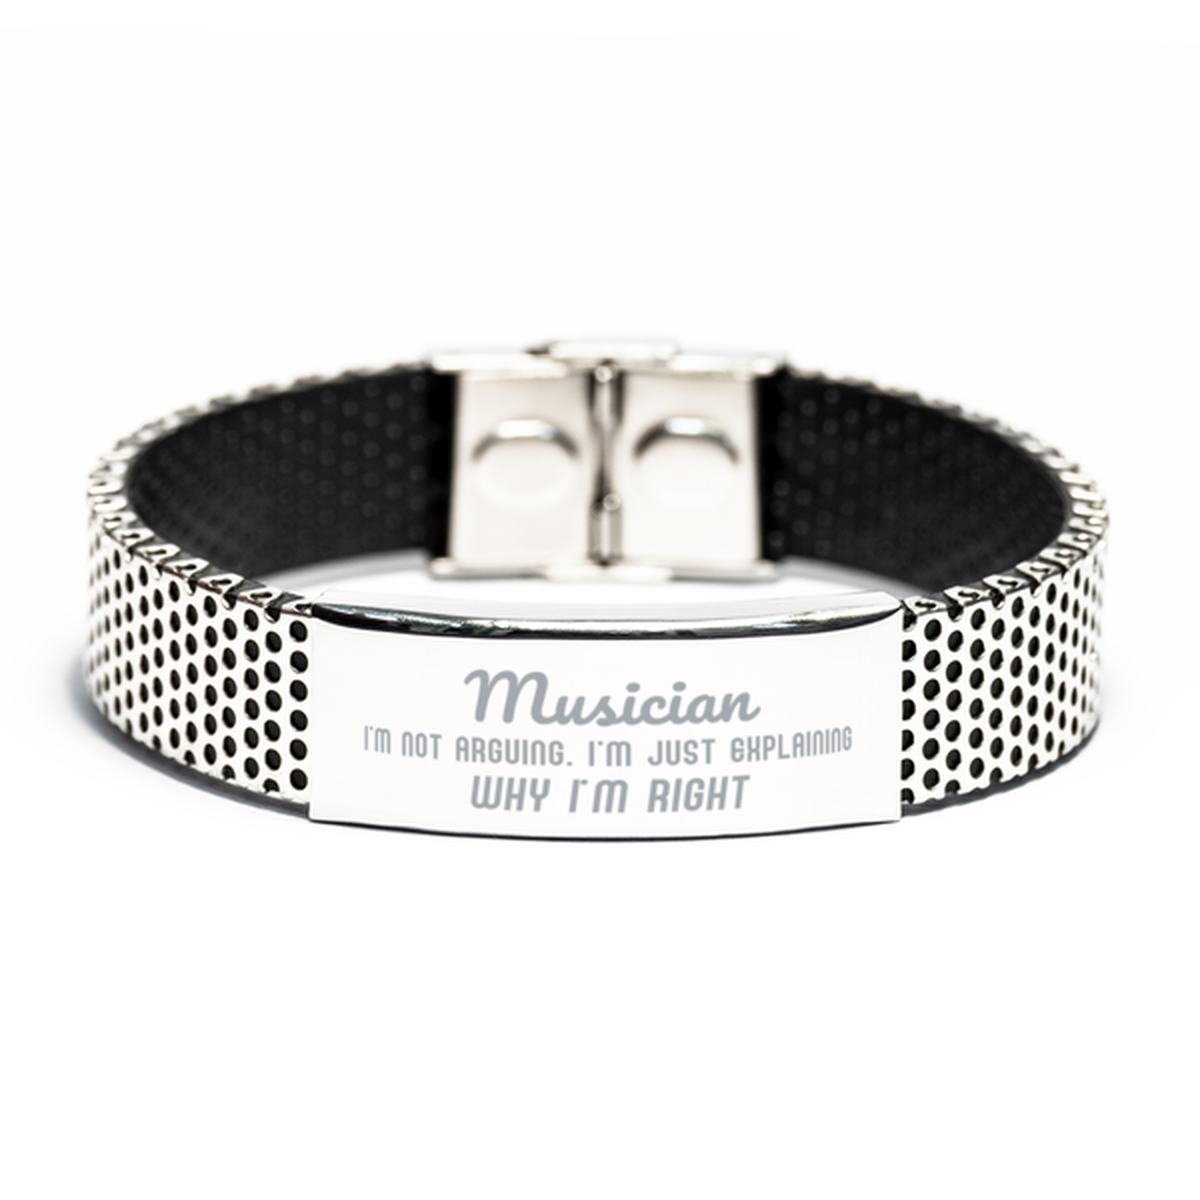 Musician I'm not Arguing. I'm Just Explaining Why I'm RIGHT Stainless Steel Bracelet, Funny Saying Quote Musician Gifts For Musician Graduation Birthday Christmas Gifts for Men Women Coworker